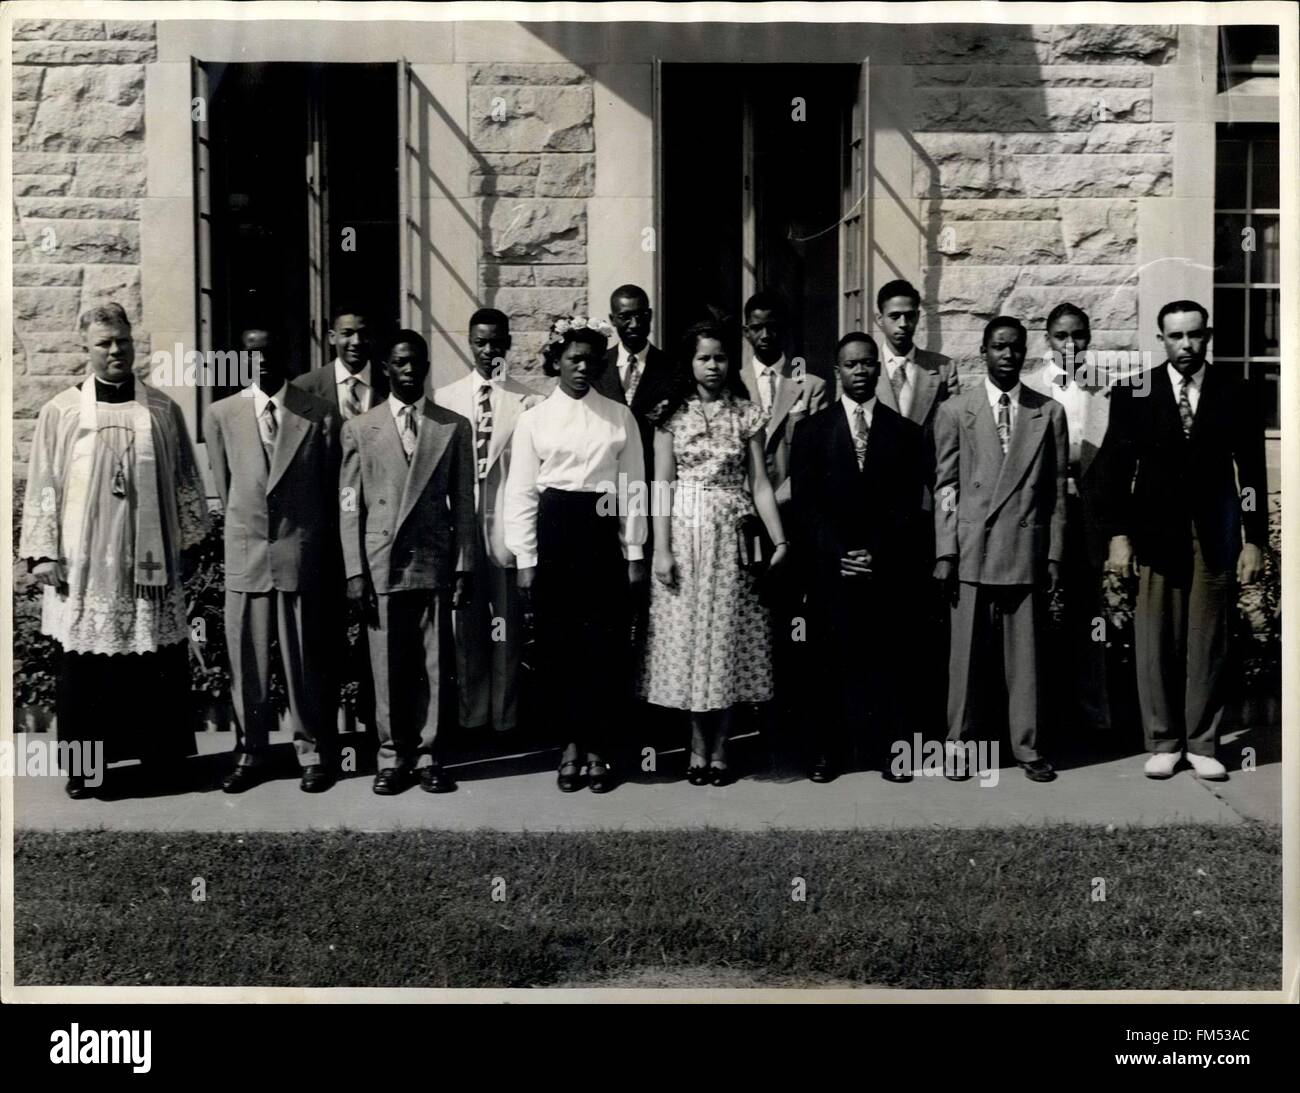 1950 - FCivil Rights ront row, left to right: Rev. John J. Conroy, S.S.J., Joseph Walker, Sidney Cox, Mary Matory, Kathleen Starke, Ansley Malone, Paul Boulding, Daniel Hughes. Back row, left to right, Robert Bonner, James McNeil, Roosevelt Florence, William Robinson, Walter Clark, Jerome Averette. The above group received the Sacrament of Baptism during the month of May '50. © Keystone Pictures USA/ZUMAPRESS.com/Alamy Live News Stock Photo